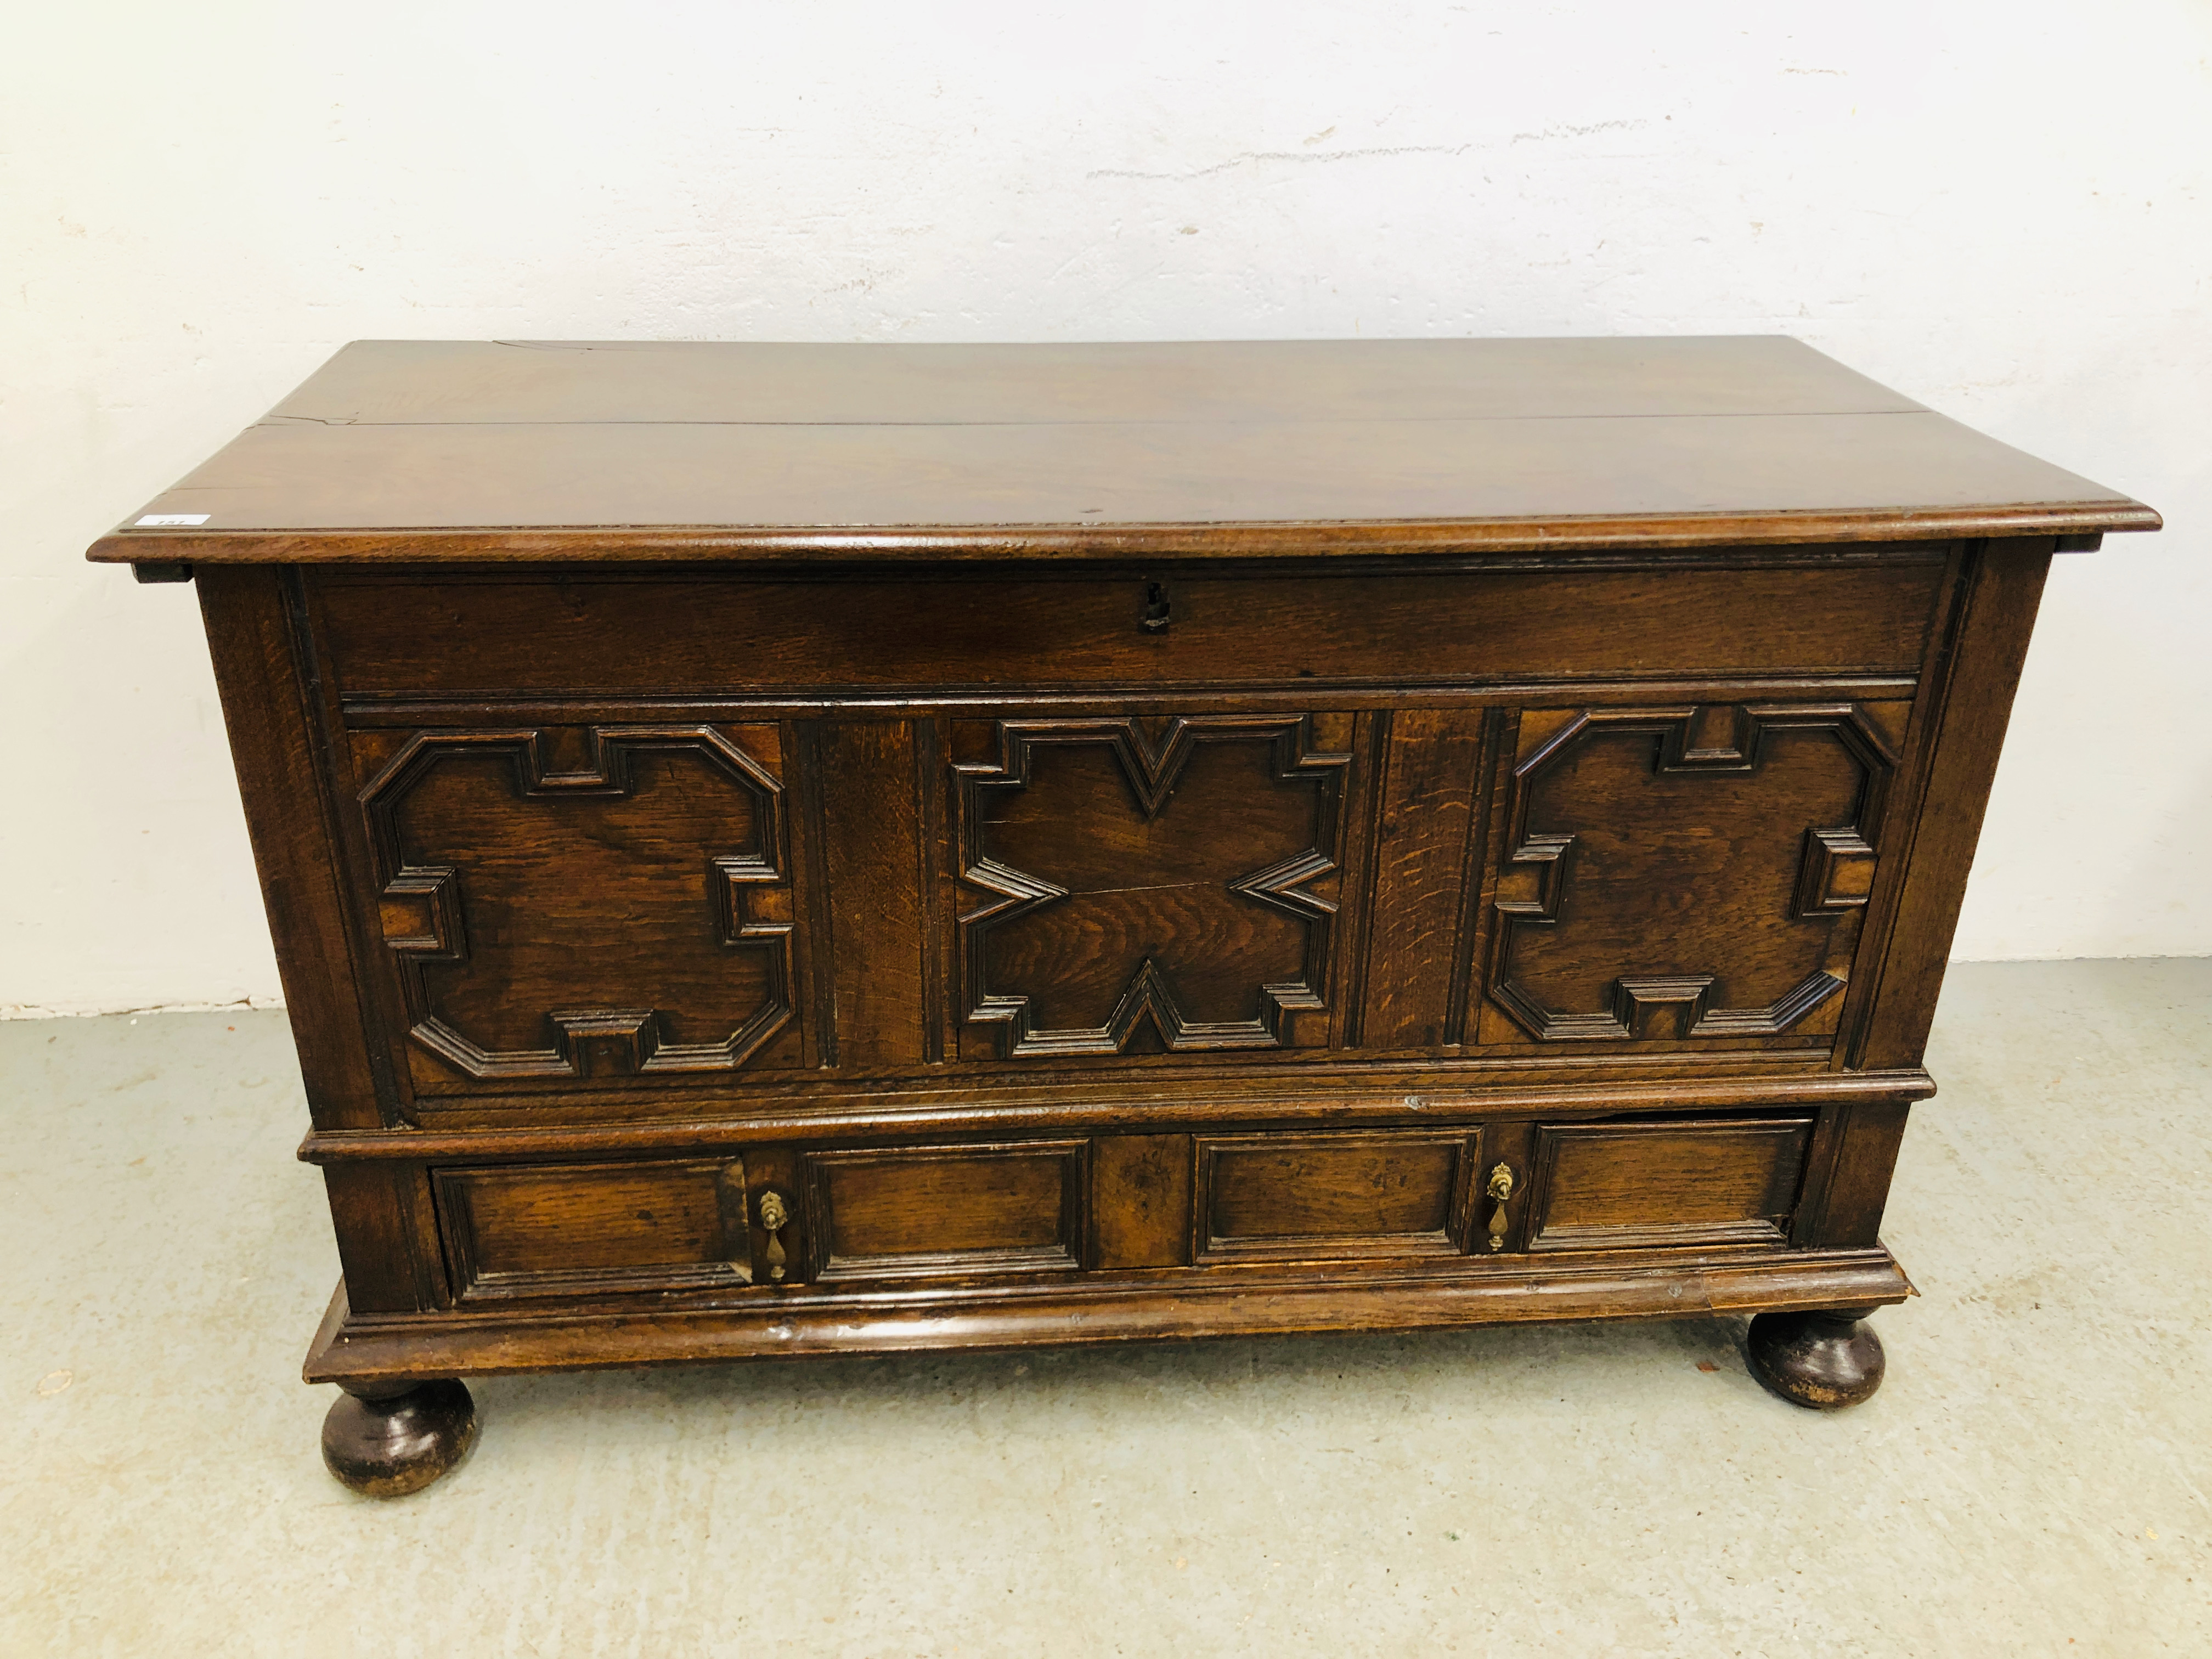 ANTIQUE OAK COFFER WITH TWO DRAWERS IN THE JACOBEAN STYLE - W 131CM. D 55CM. H 79CM. - Image 7 of 12